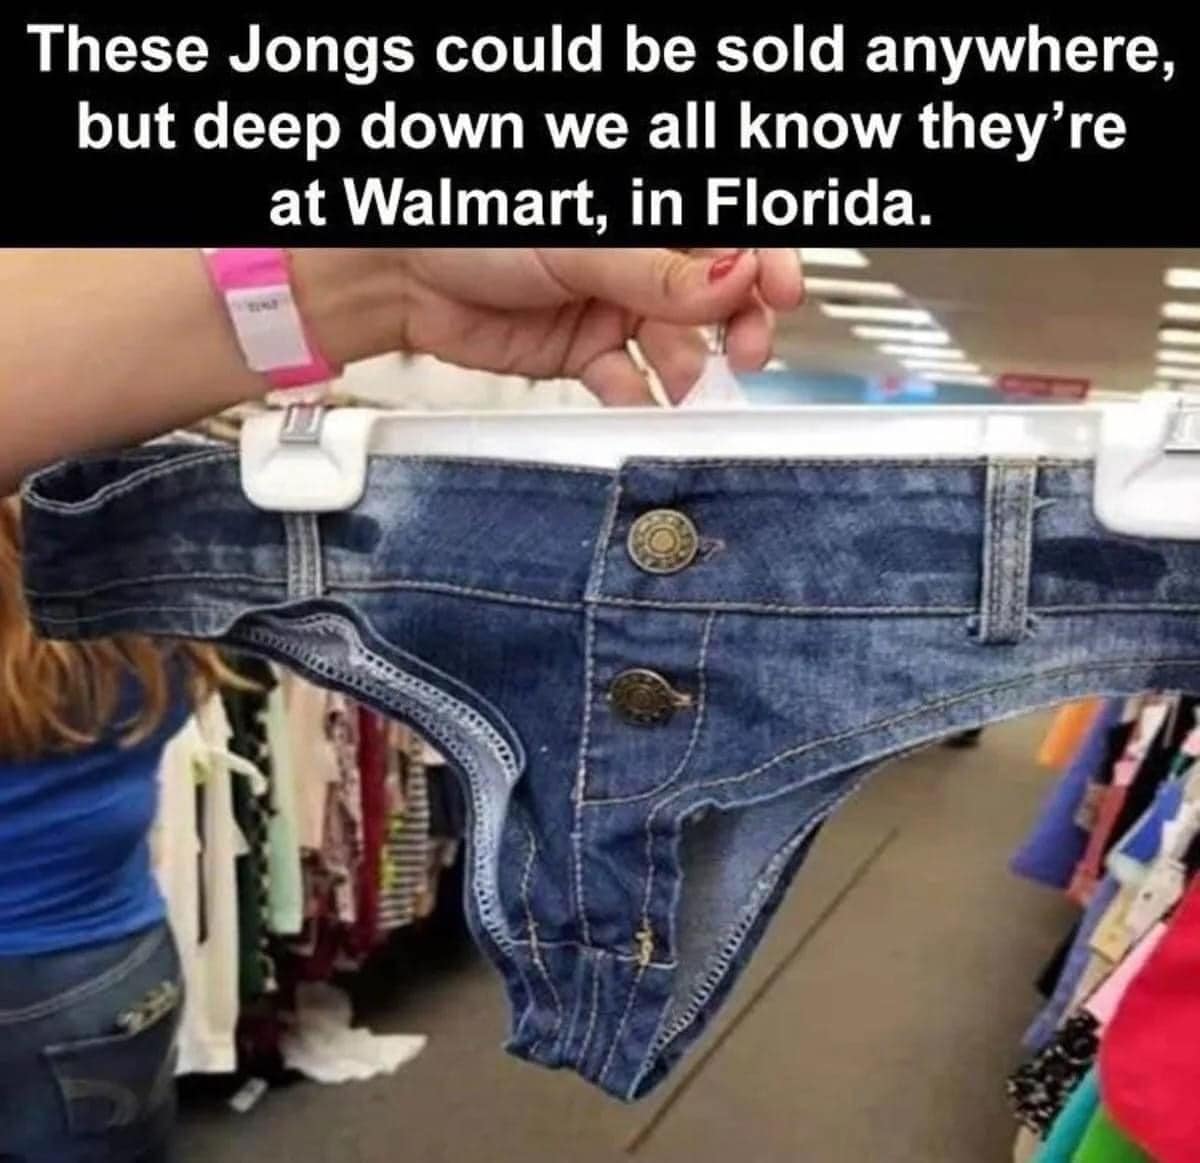 These Jongs could be sold anywhere, but deep down we all know they're at Walmart, in Florida.